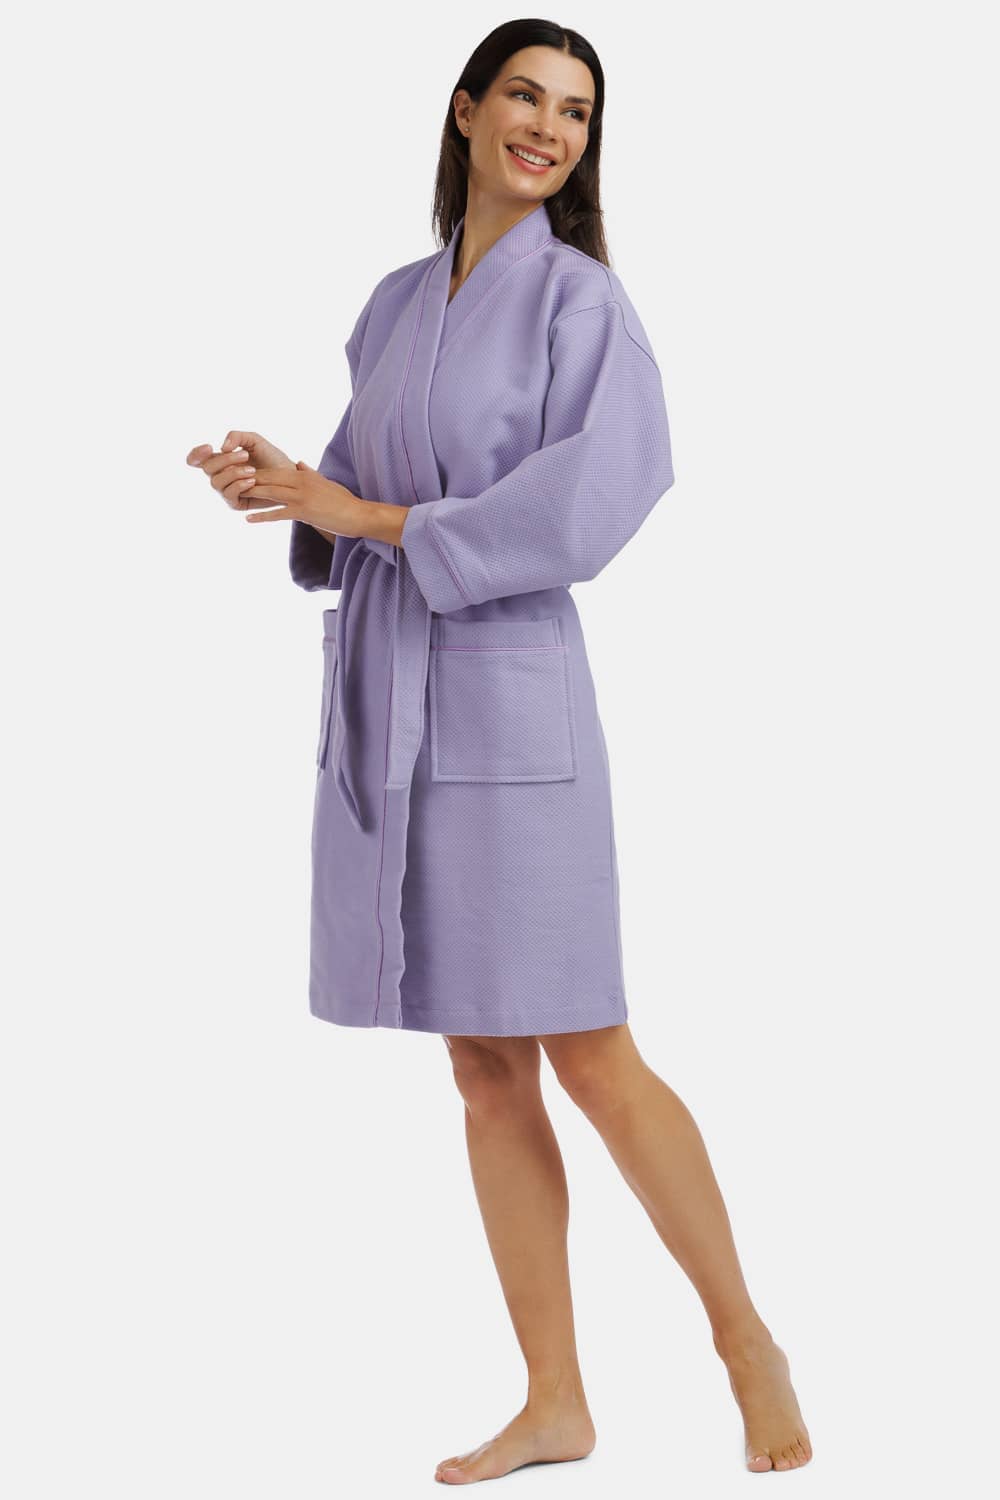 Women's Modal Kimono Resort Spa Robe with Quilted Design - NEW & IMPROVED FABRIC Womens>Sleep and Lounge>Robe Fishers Finery 